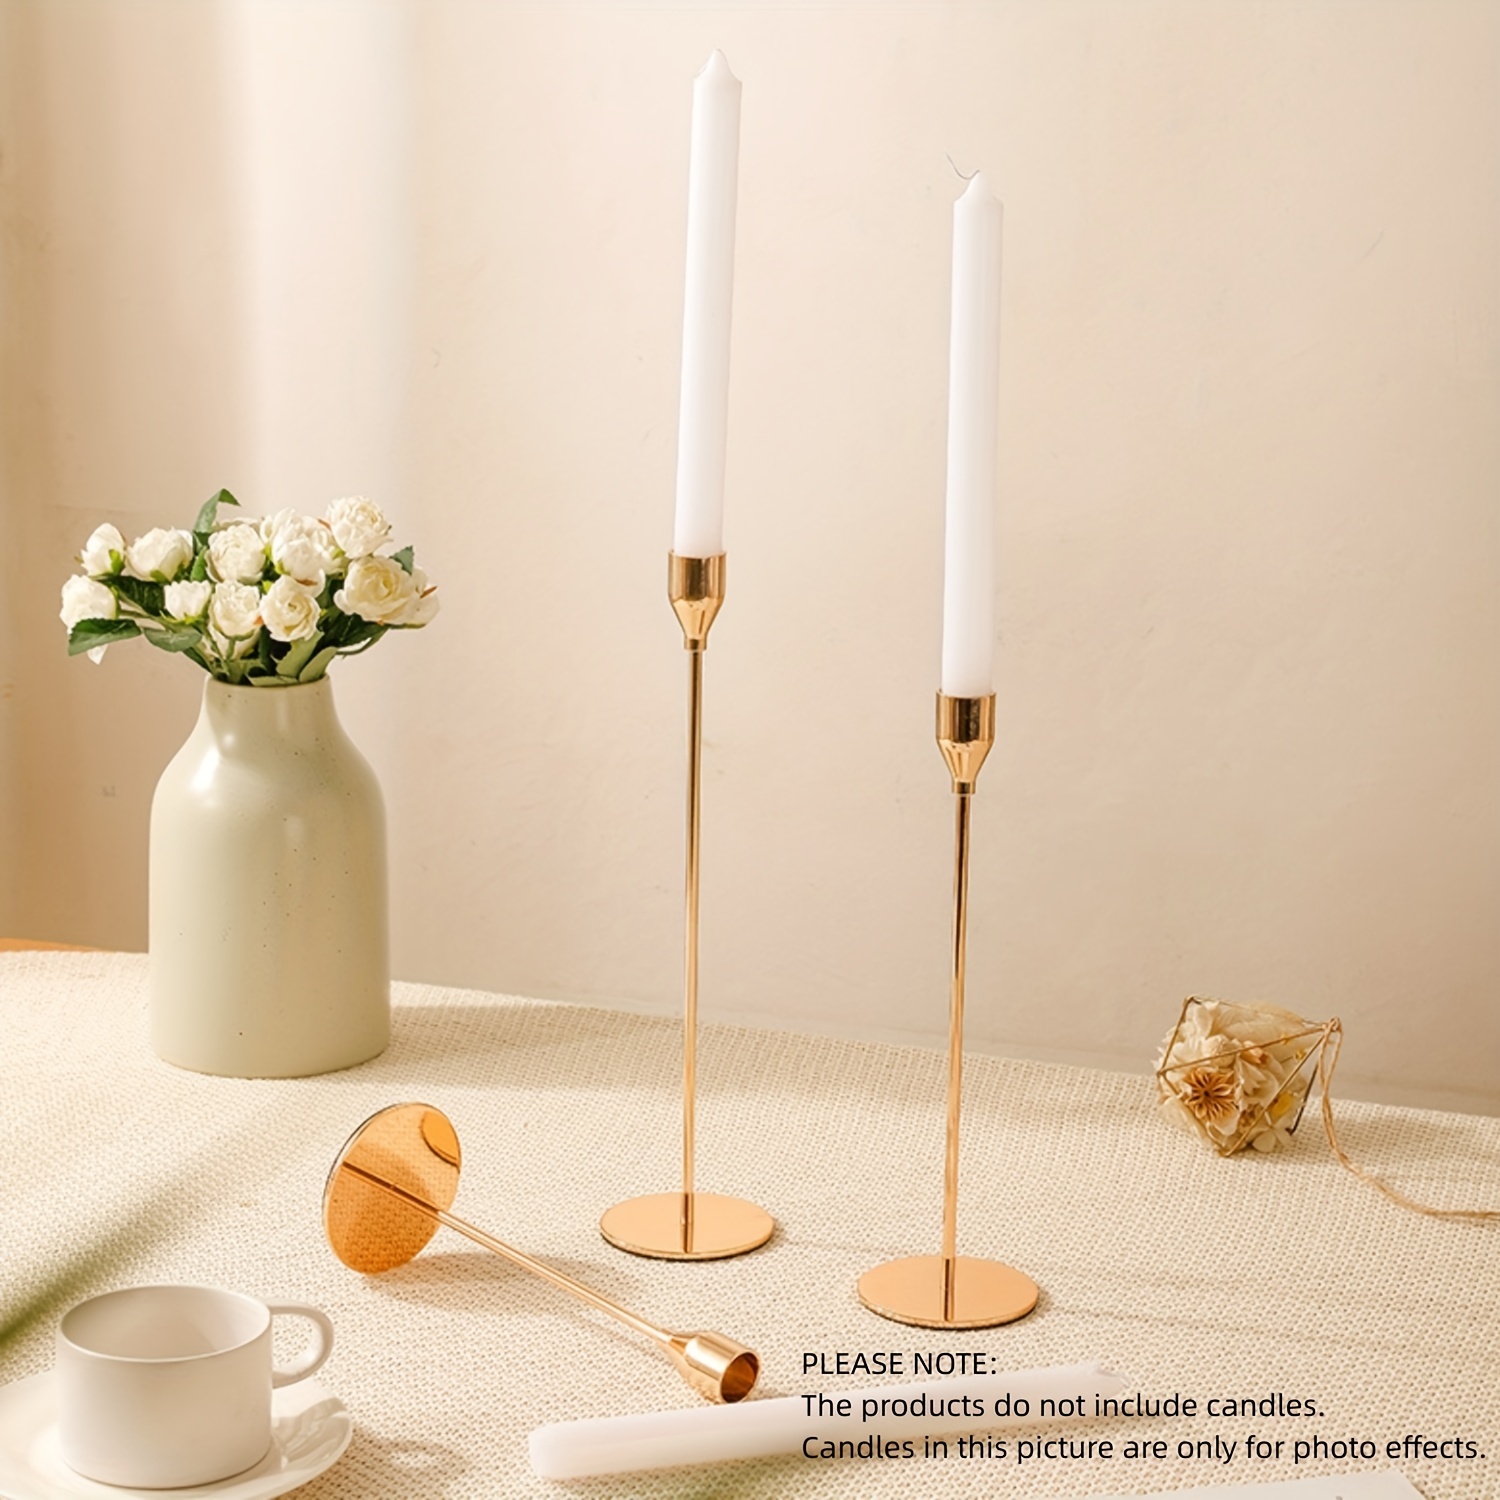  Wooden Candlestick Holders for Taper Candles Set of 3, Luxury  Wood Candle Holders with Gold Cups and Decorative Wooden Cubes, Fireplace Candle  Holder